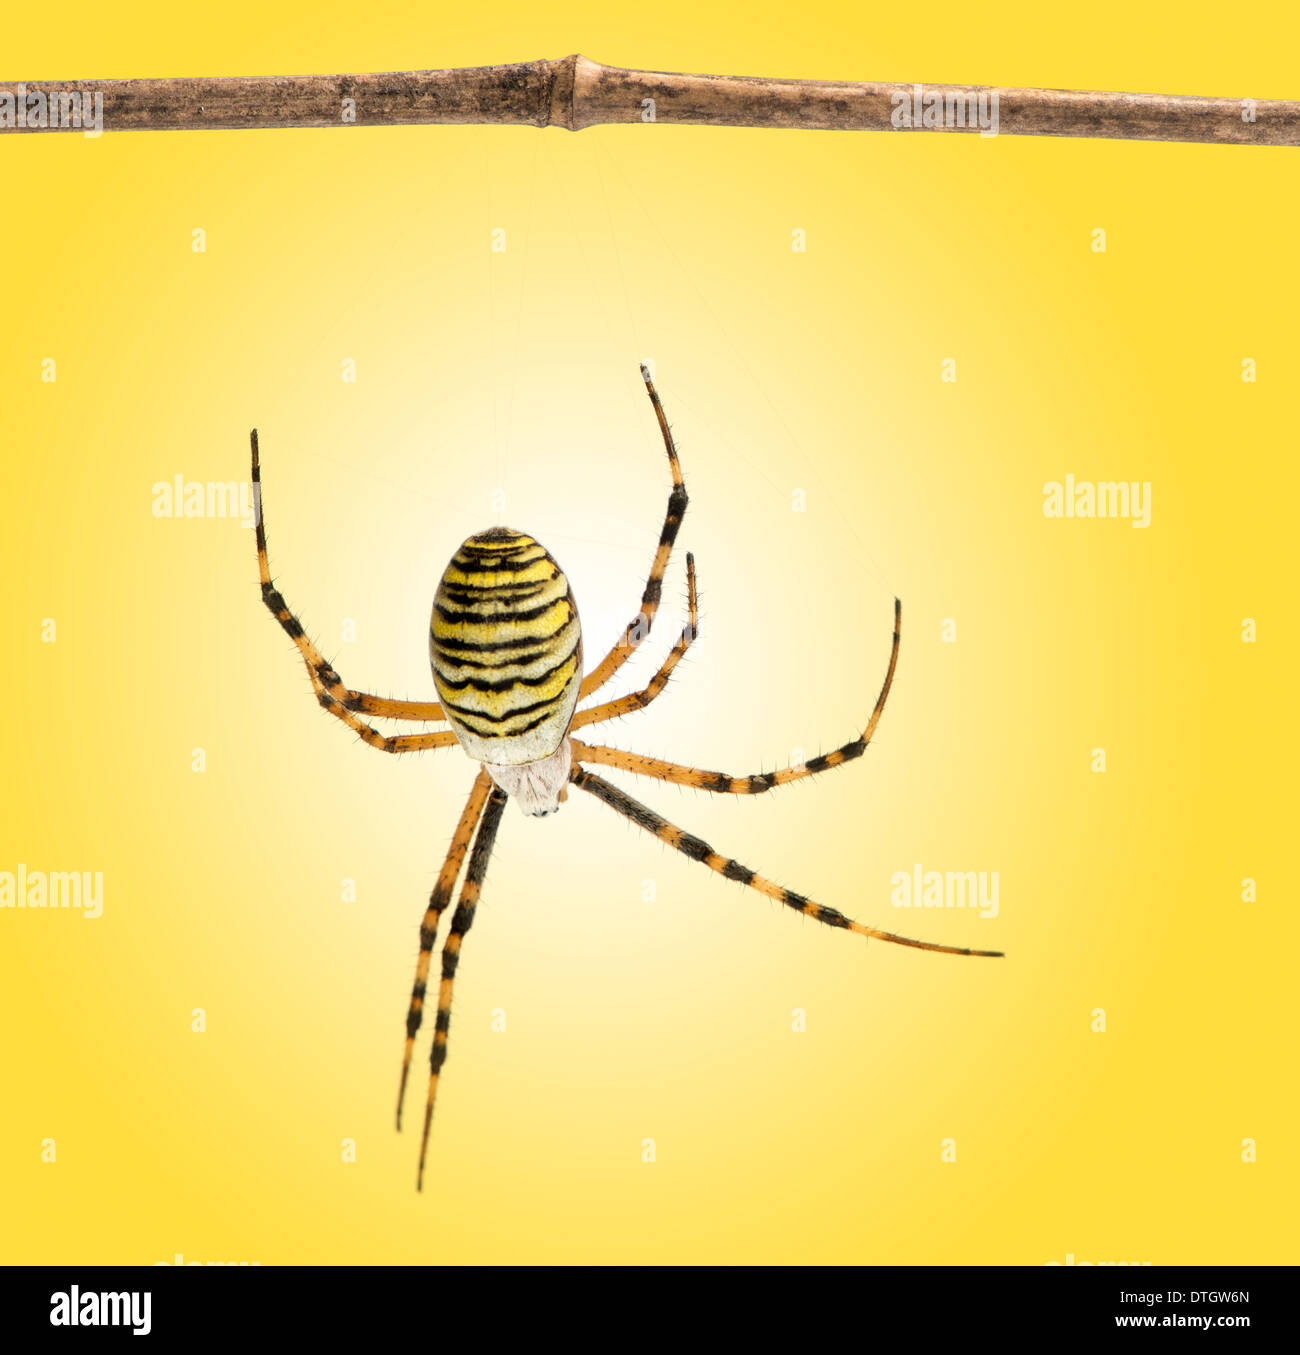 Back view of a wasp spider hanging from branch, Argiope bruennichi, on a yellow background Stock Photo